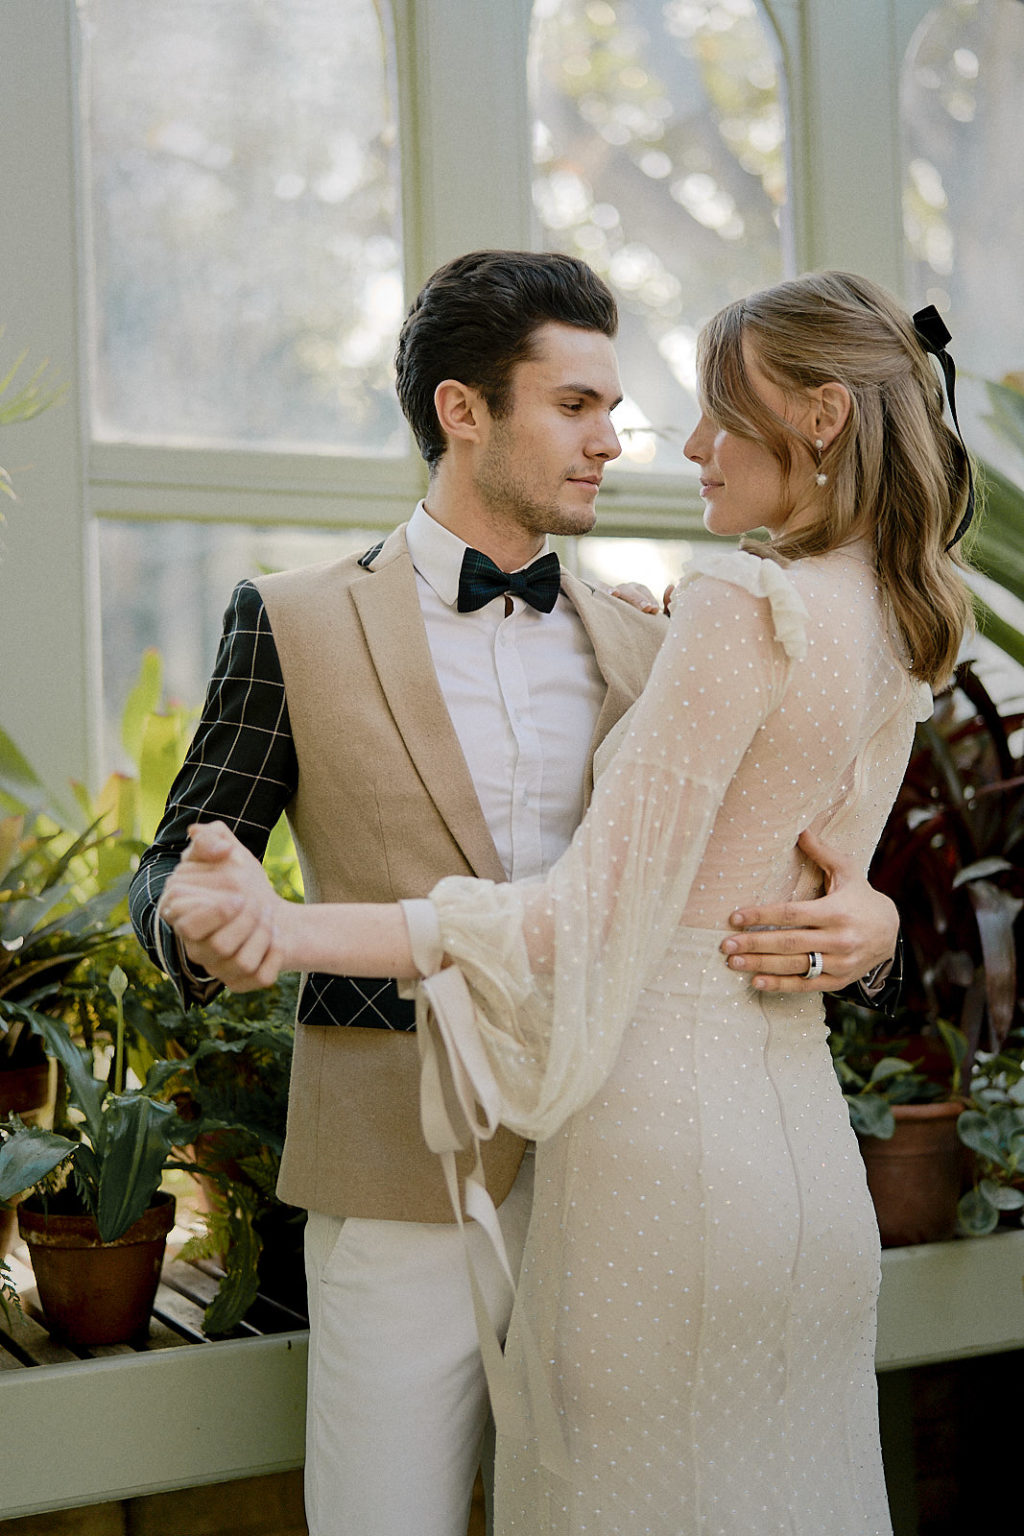 Luxury Picnic Wedding With Chic Victorian Inspiration